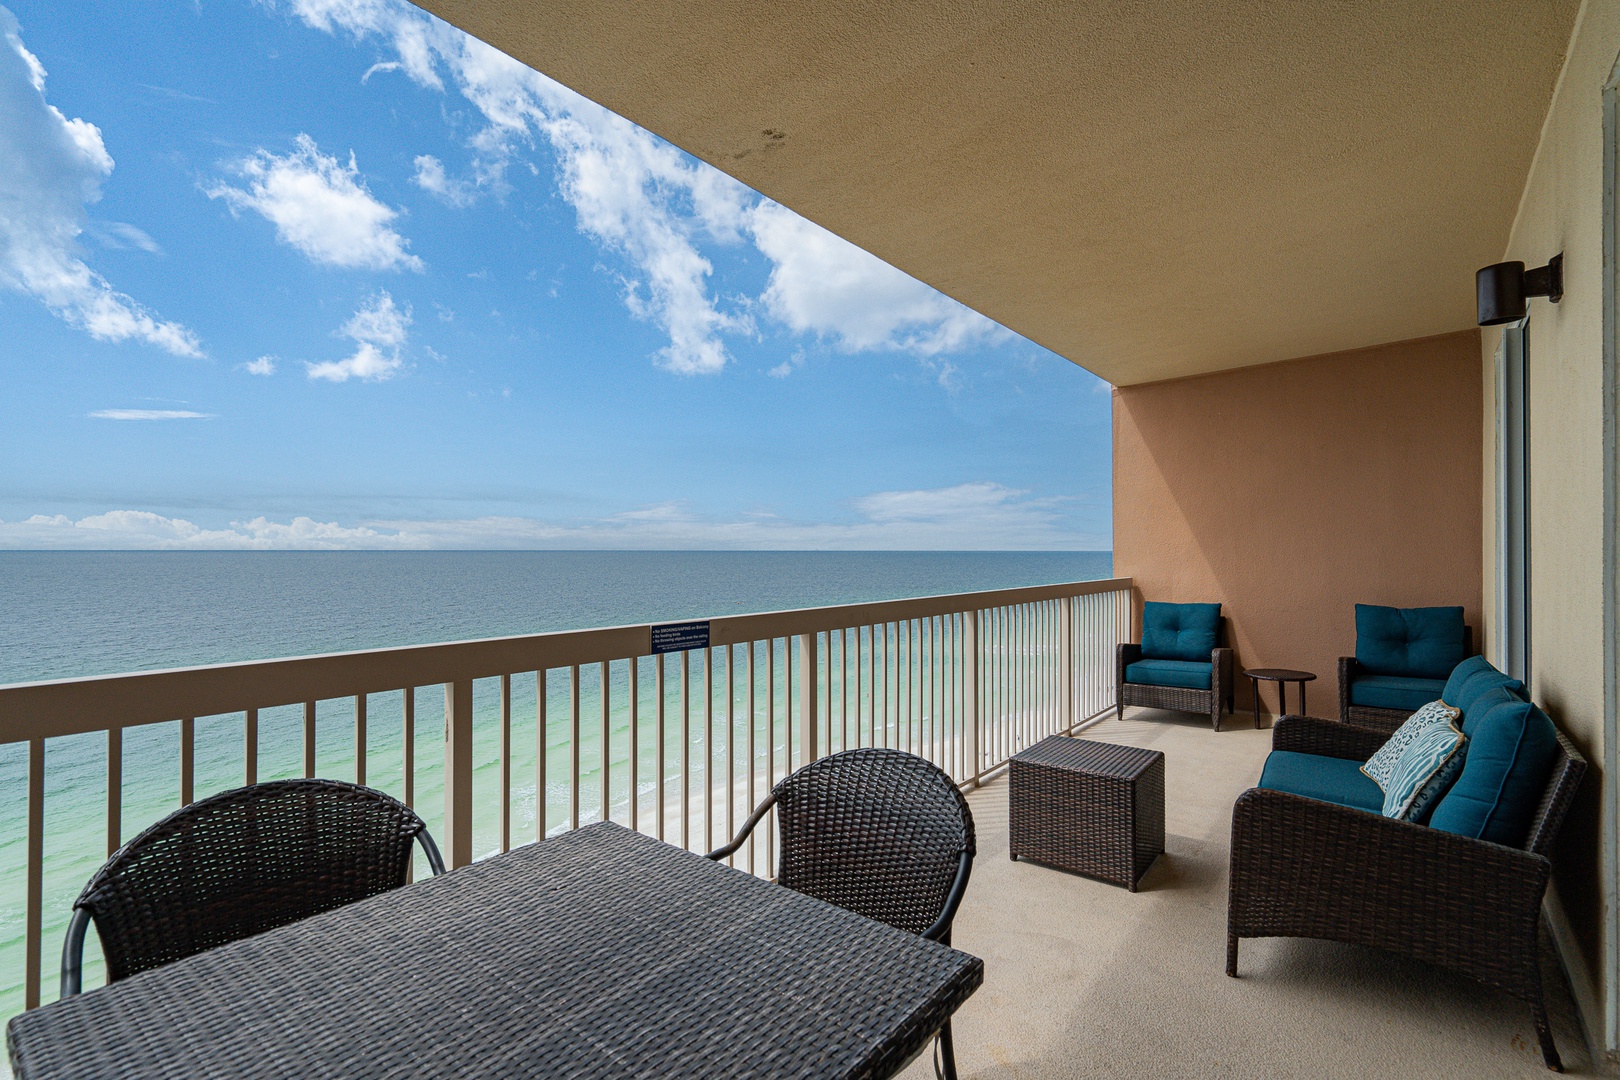 Kick back & relax or dine alfresco on the ocean-view balcony